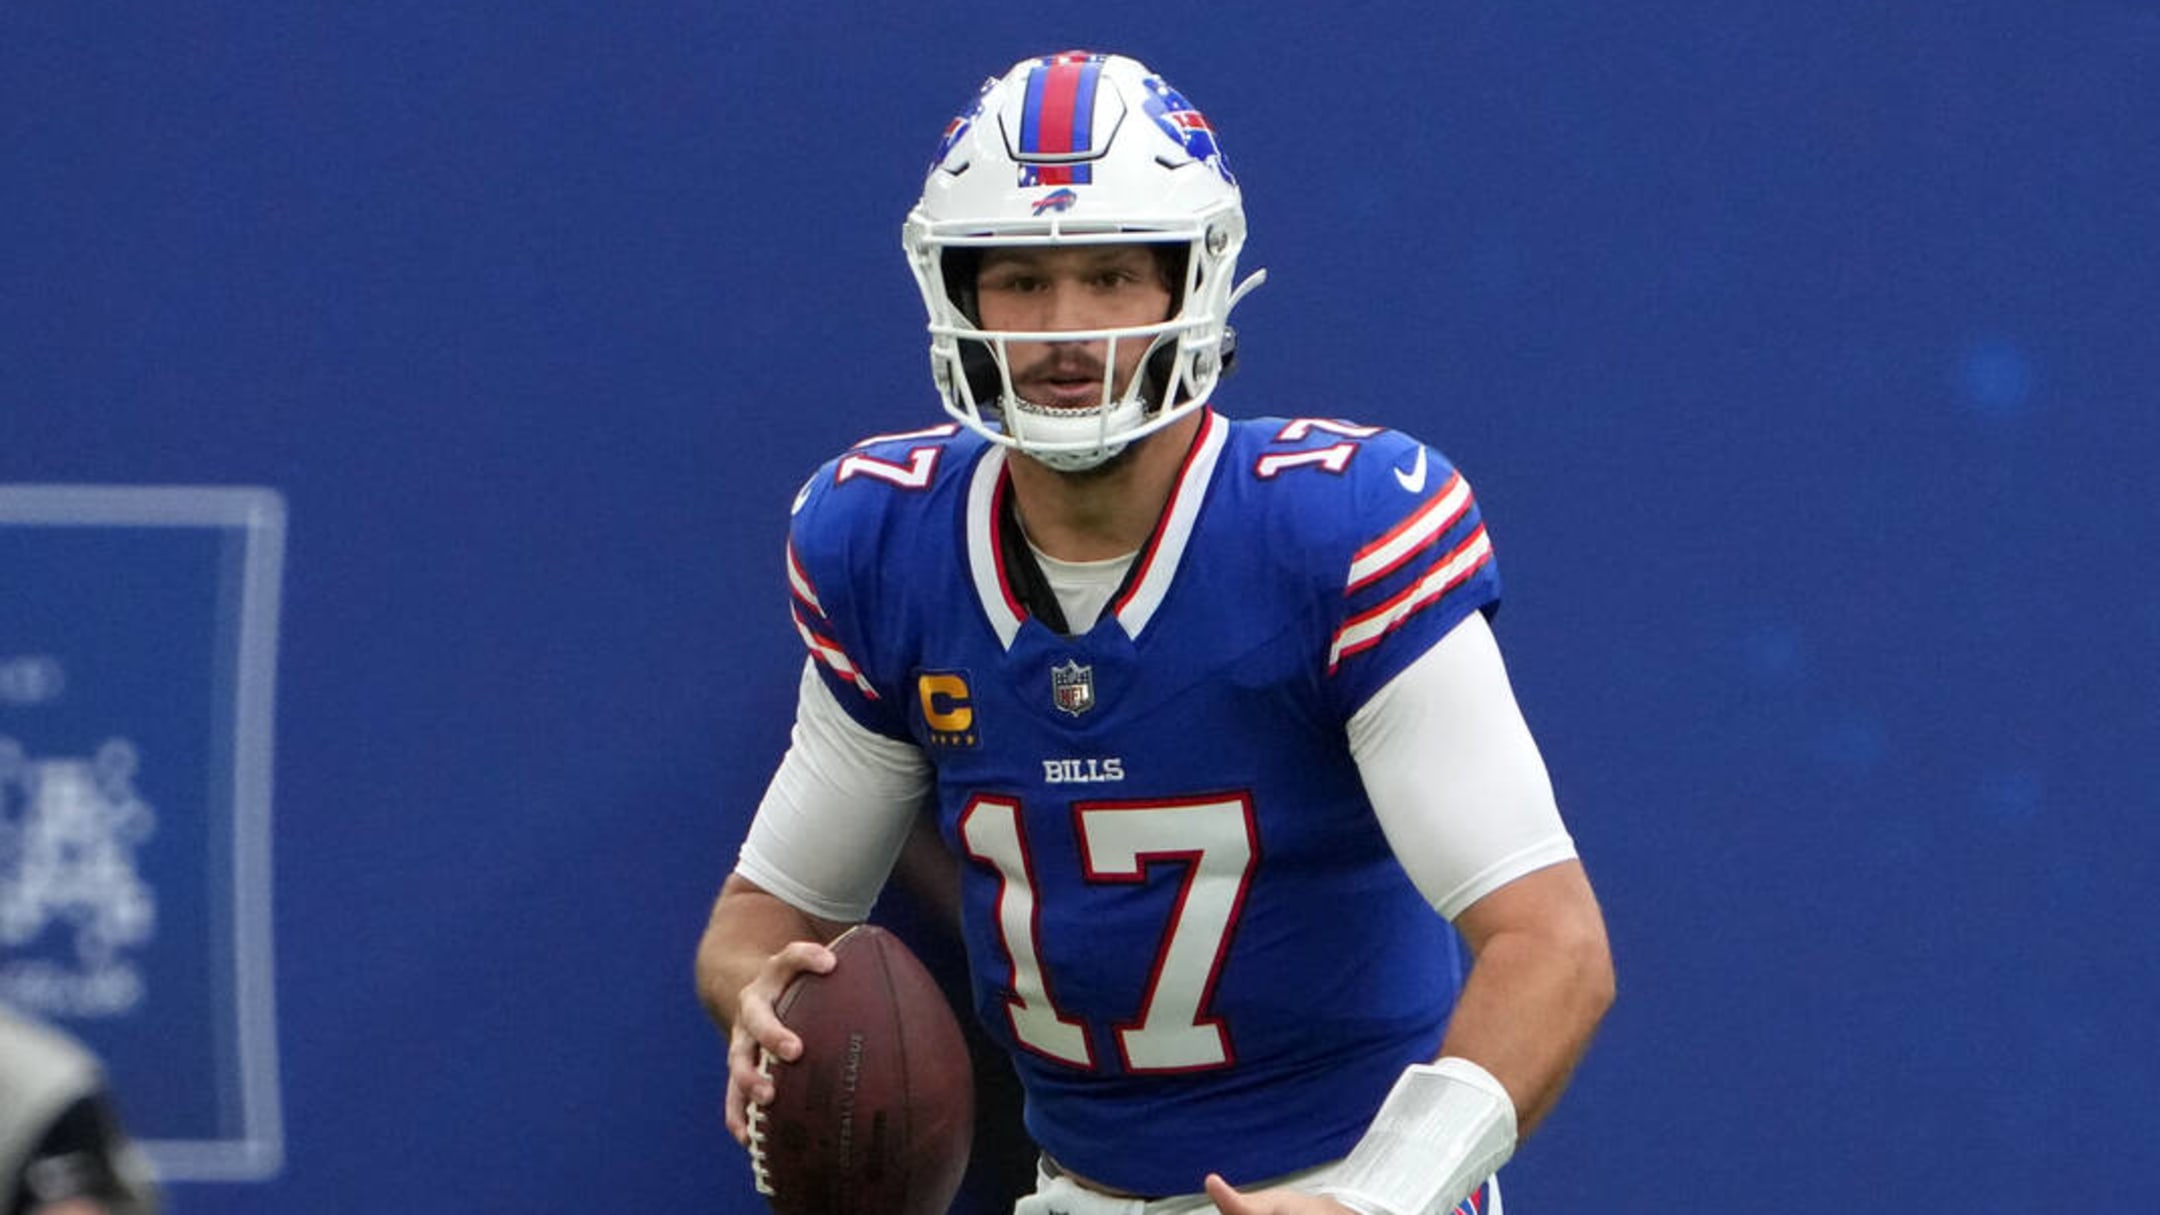 The Bills are still the team to beat in the AFC East, as they